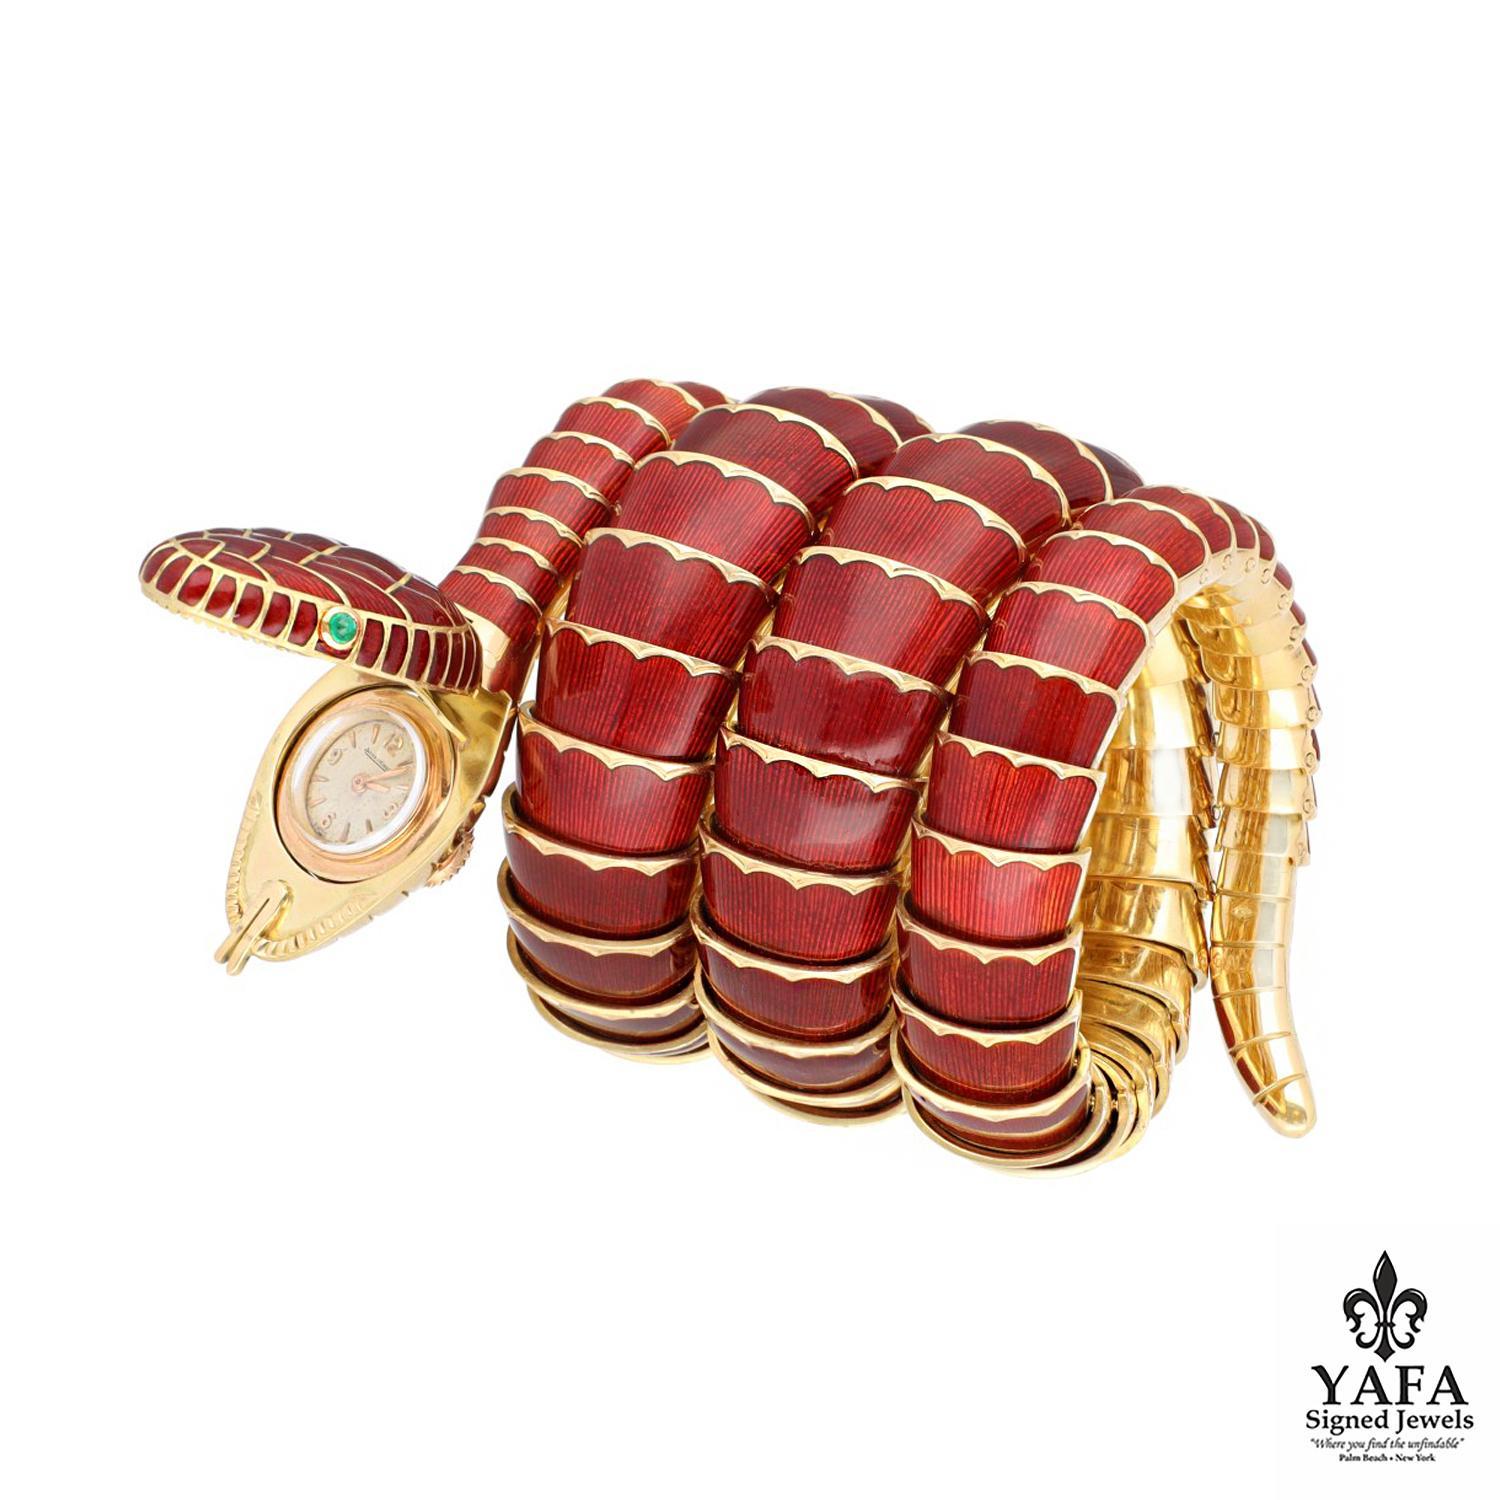 Quintessentially BULGARI and Crafted During the Golden Age of the 1960's, This Iconic Serpenti Bracelet and Timepiece is Designed as a Coiled Serpent. Crafted in 18K Yellow Gold Segments and Adorned with Deep Red Translucent Enamel and Eyes of Round